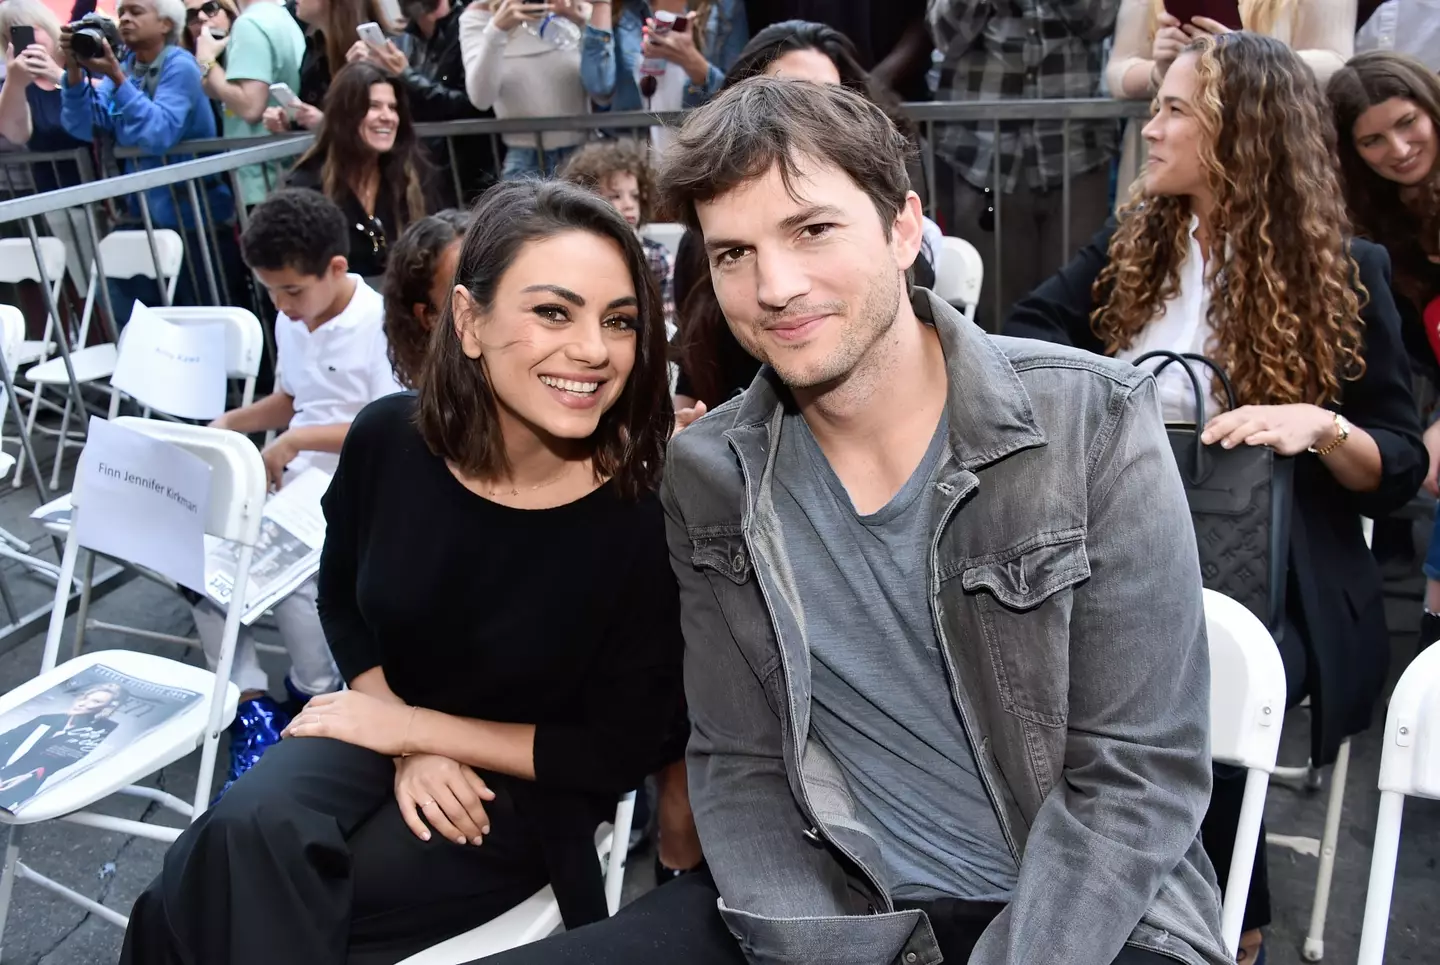 Ashton Kutcher and Mila Kunis admitted to not bathing their kids regularly. (Alberto E. Rodriguez/Getty Images)